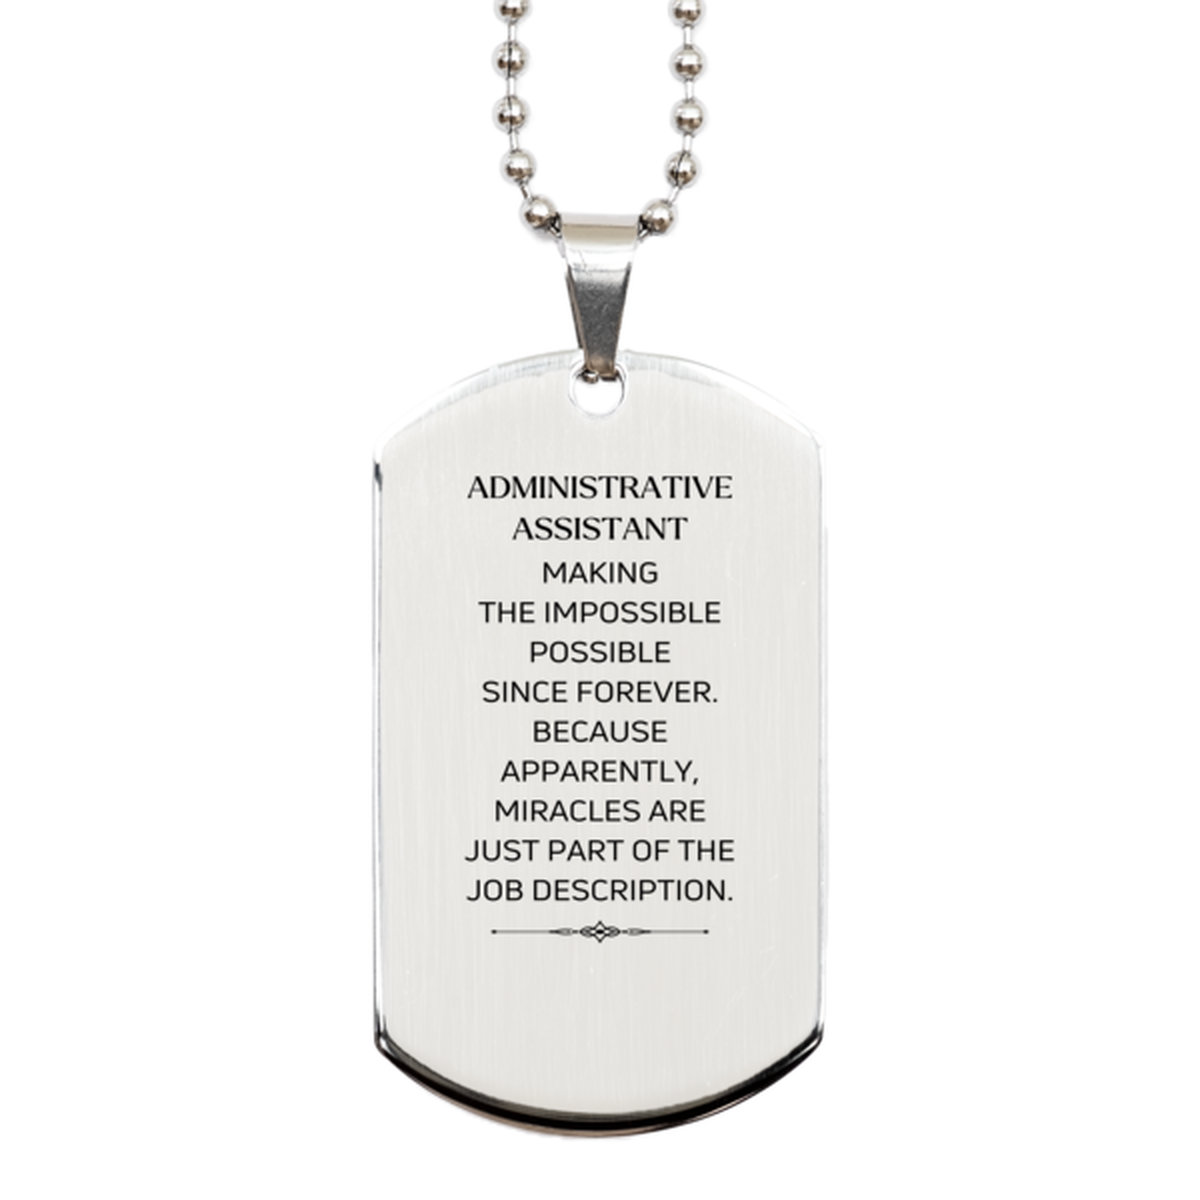 Funny Administrative Assistant Gifts, Miracles are just part of the job description, Inspirational Birthday Silver Dog Tag For Administrative Assistant, Men, Women, Coworkers, Friends, Boss